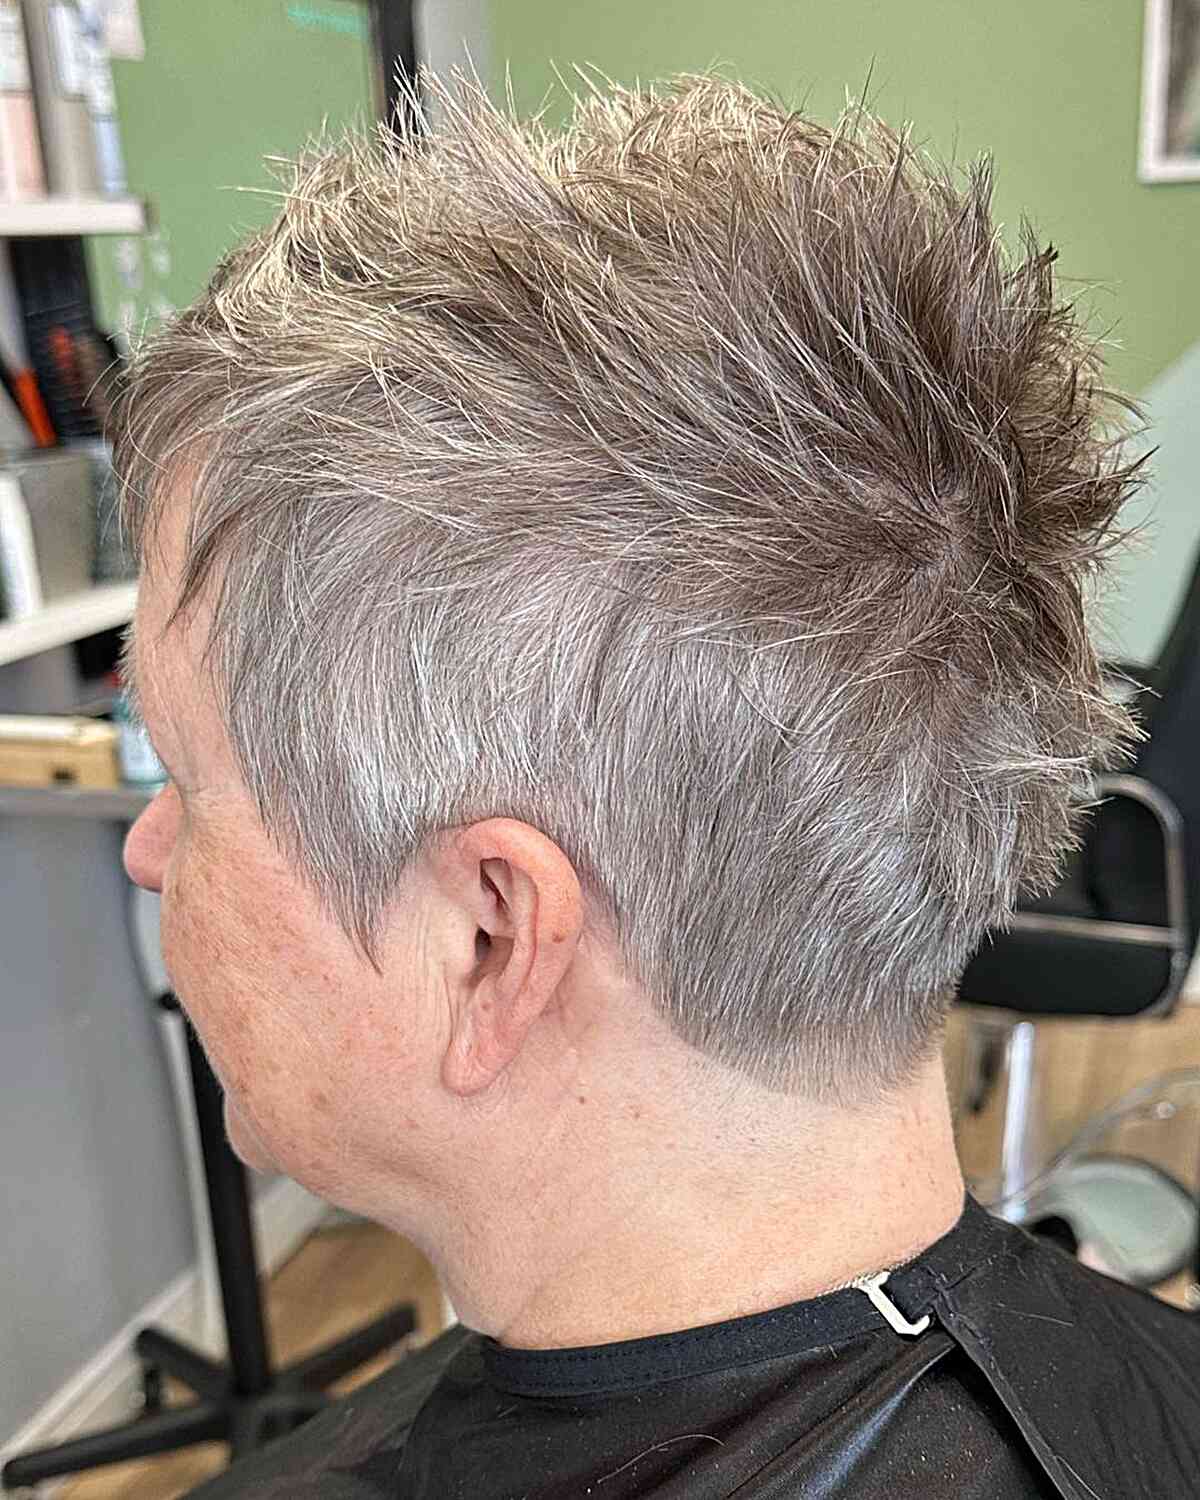 spiked pixie style for short choppy layers on women aged